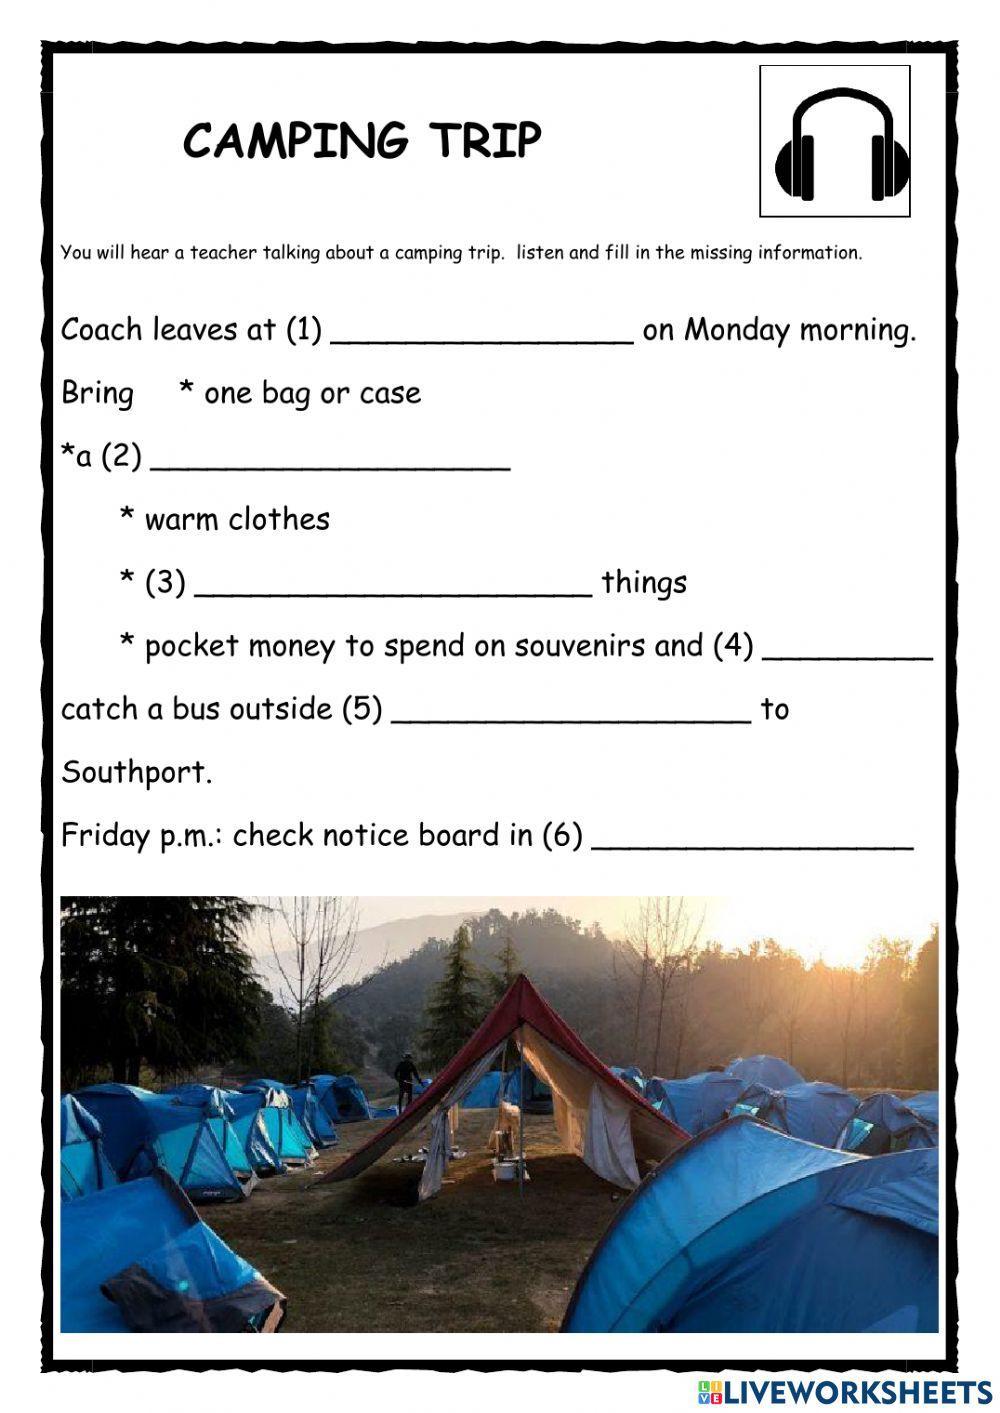 the camping trip will be held listening pdf